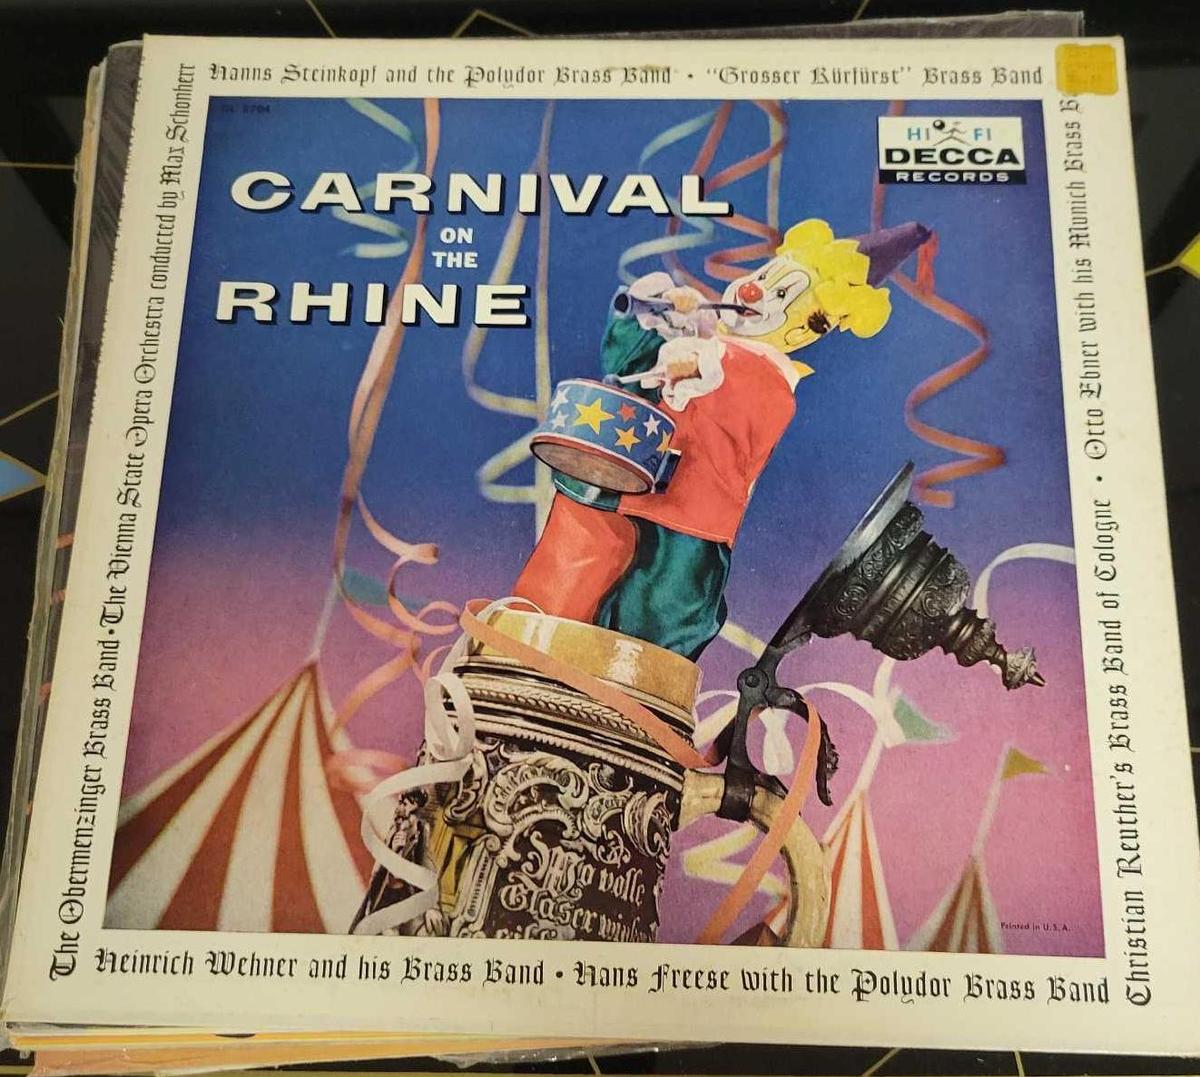 Carnival on the Rhine Record $1 STS